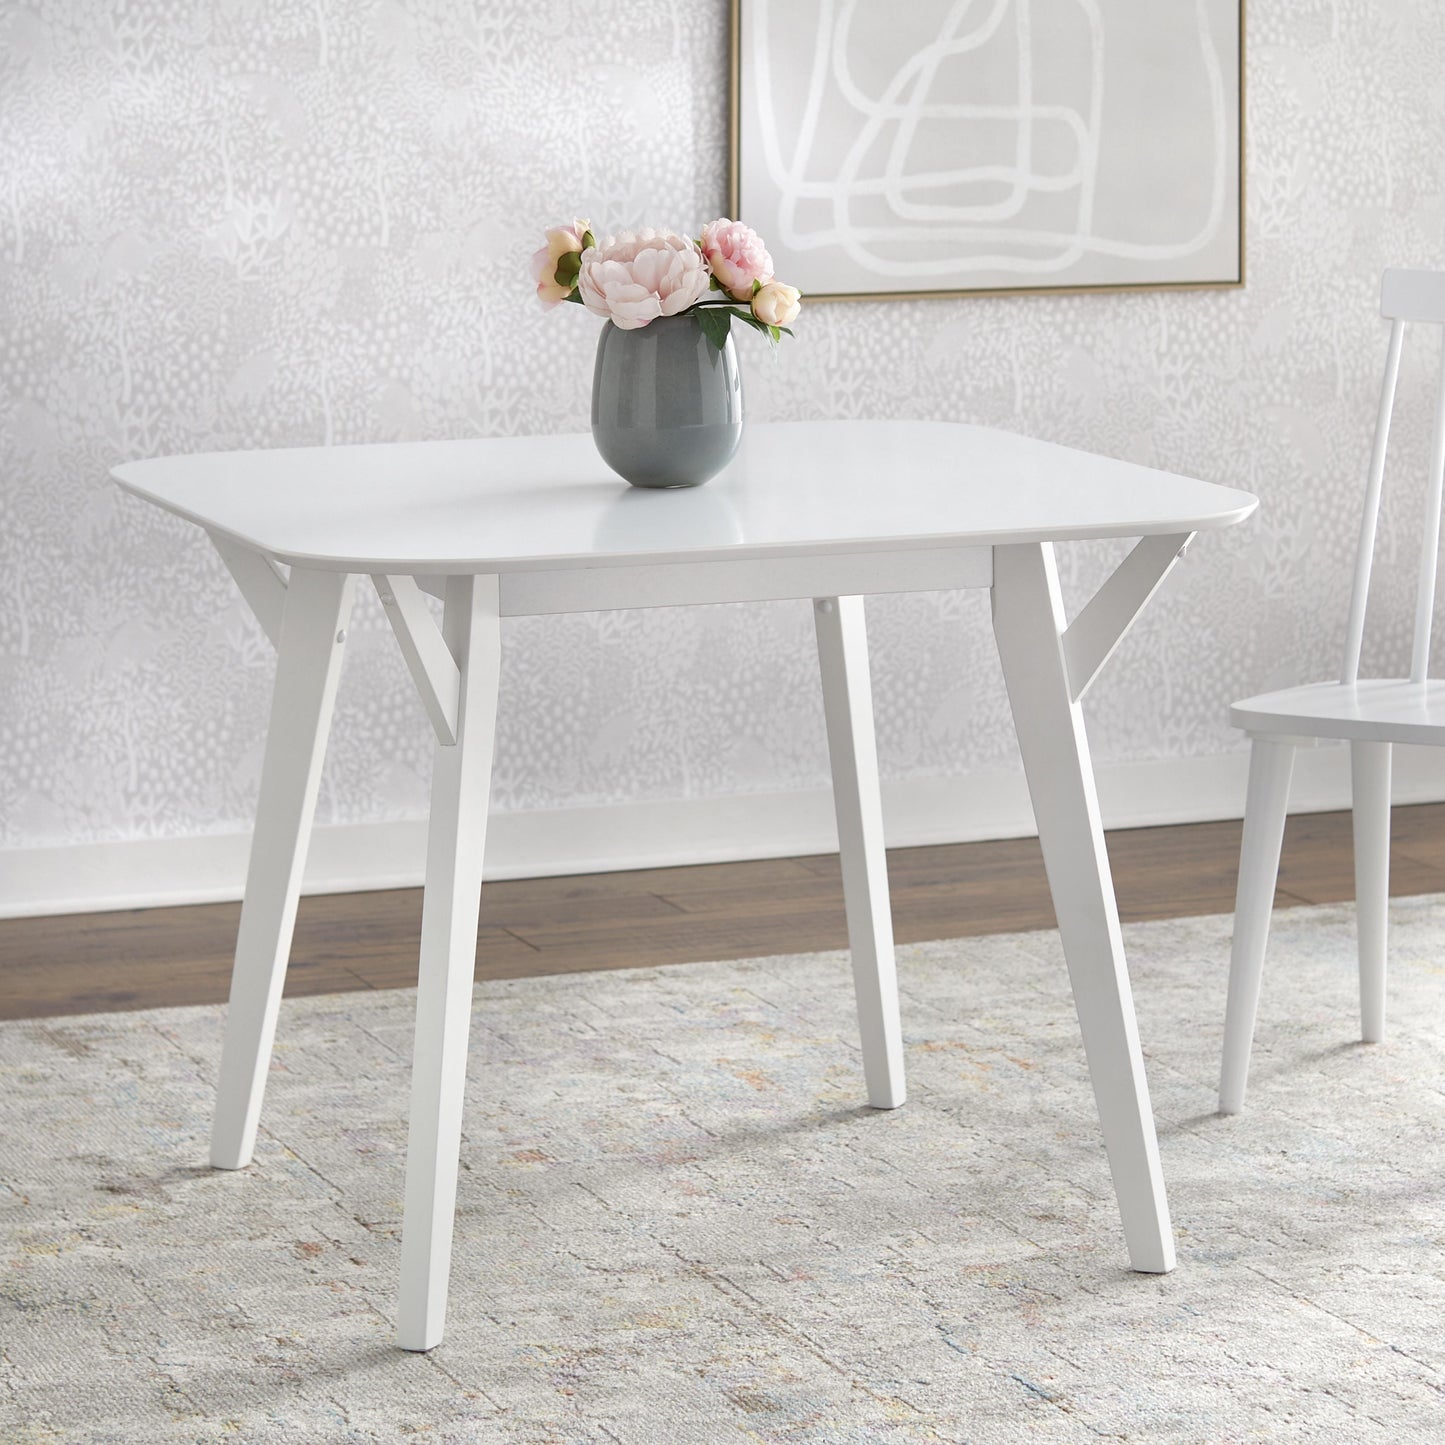 angelo:HOME Dining Set - Annabelle 3-Piece (White Table, Summer Floral Chairs)